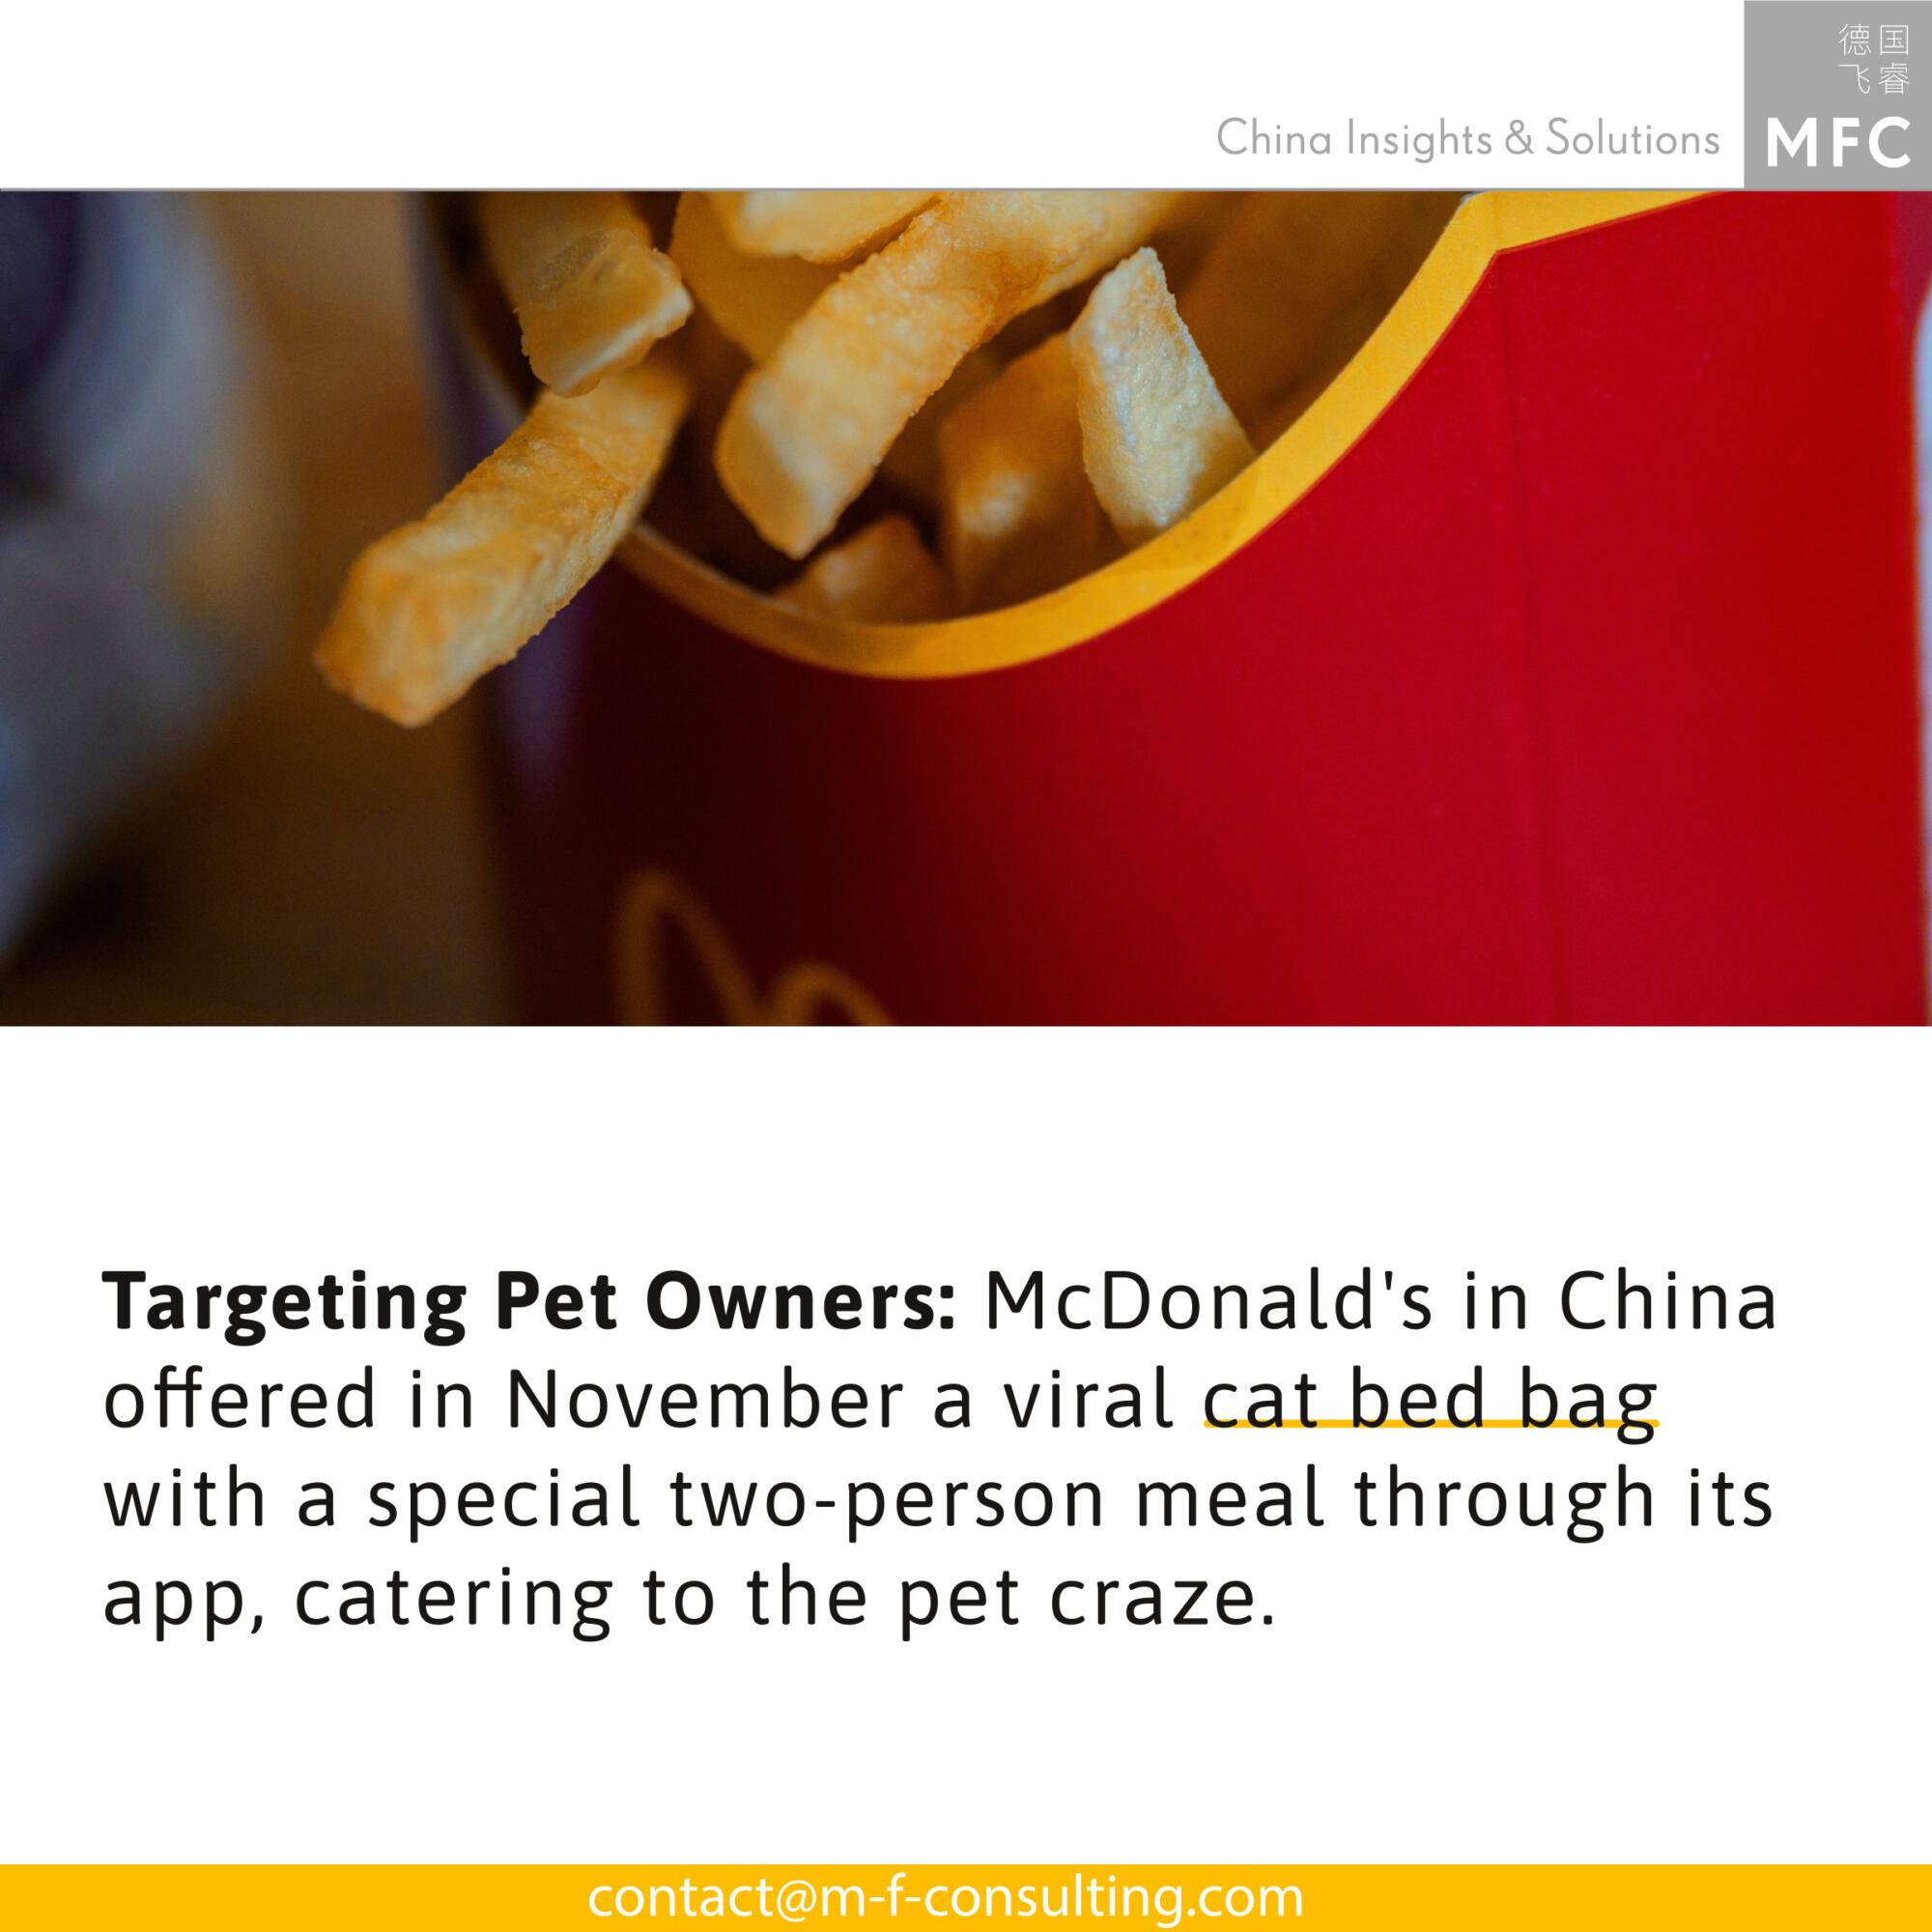 China's pet industry: Targeting pet owners: McDonald's in China offered a viral cat bed bag with a special two-person meal through its app, catering to the pet craze.